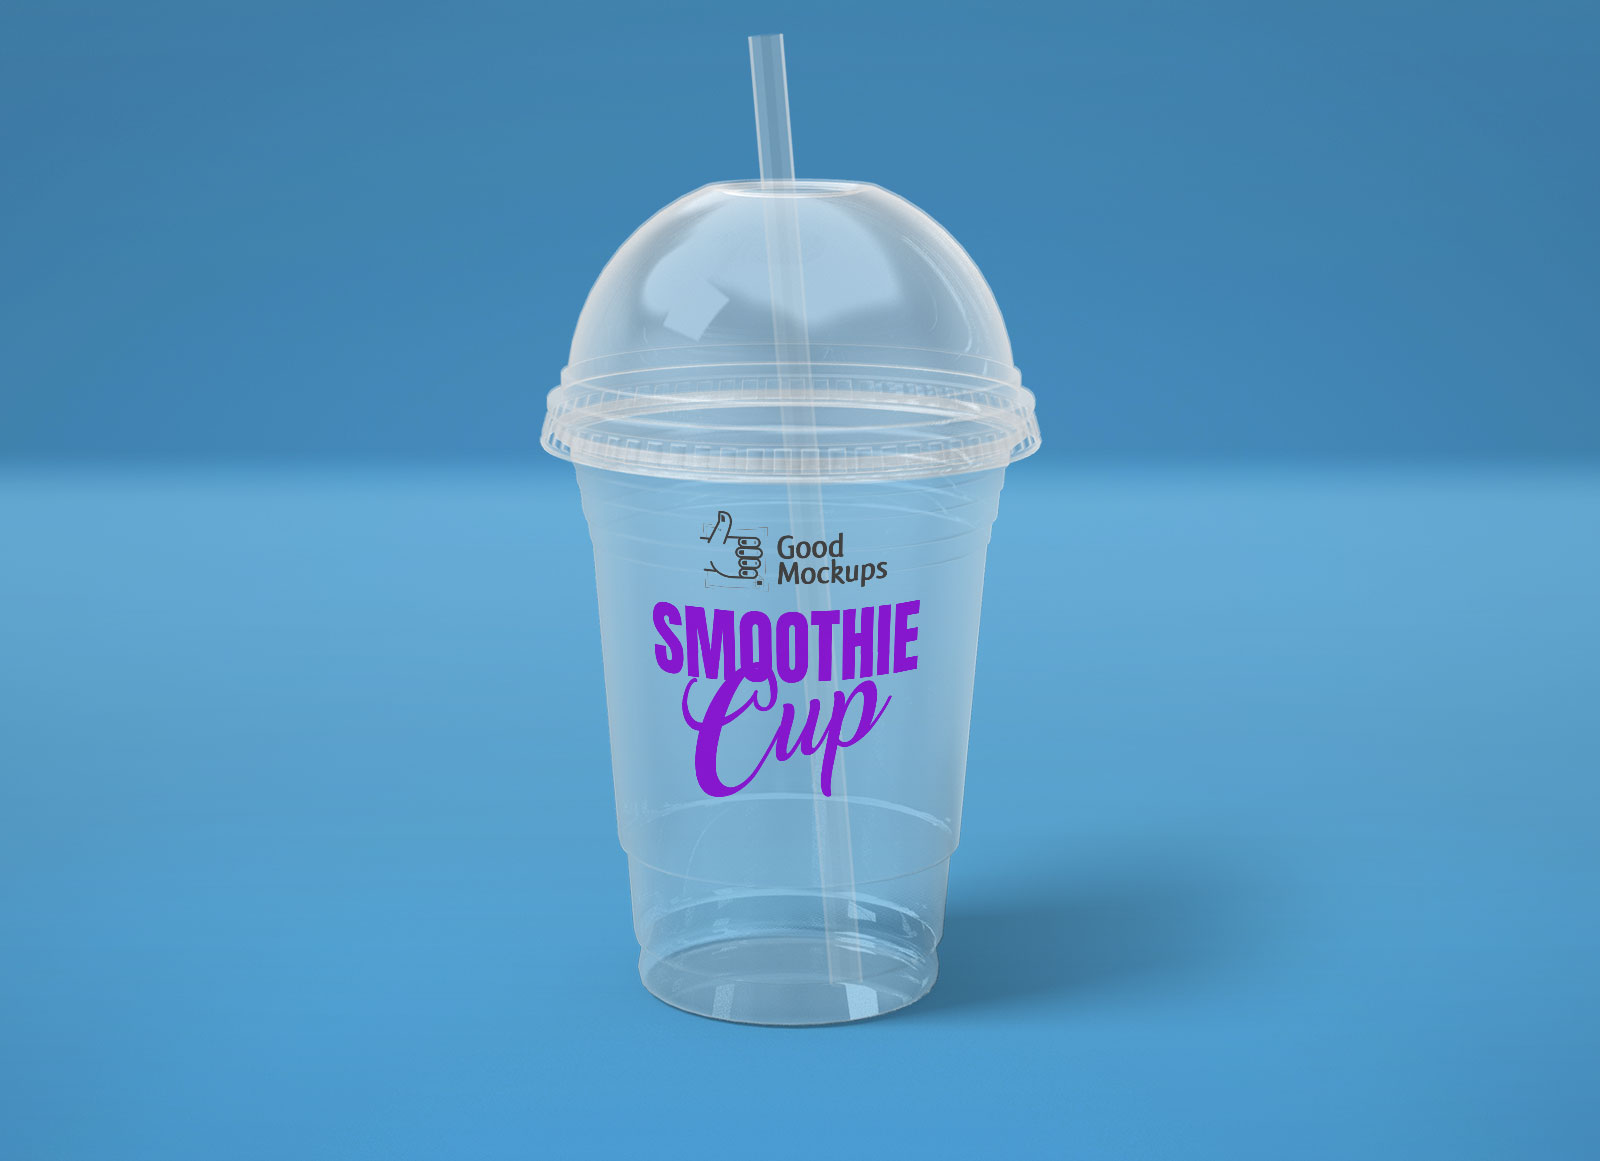 Free-Transparent-Disponsable-Plastic-Smoothie-Ice-Cream-Cup-Packaging-Mockup-PSD